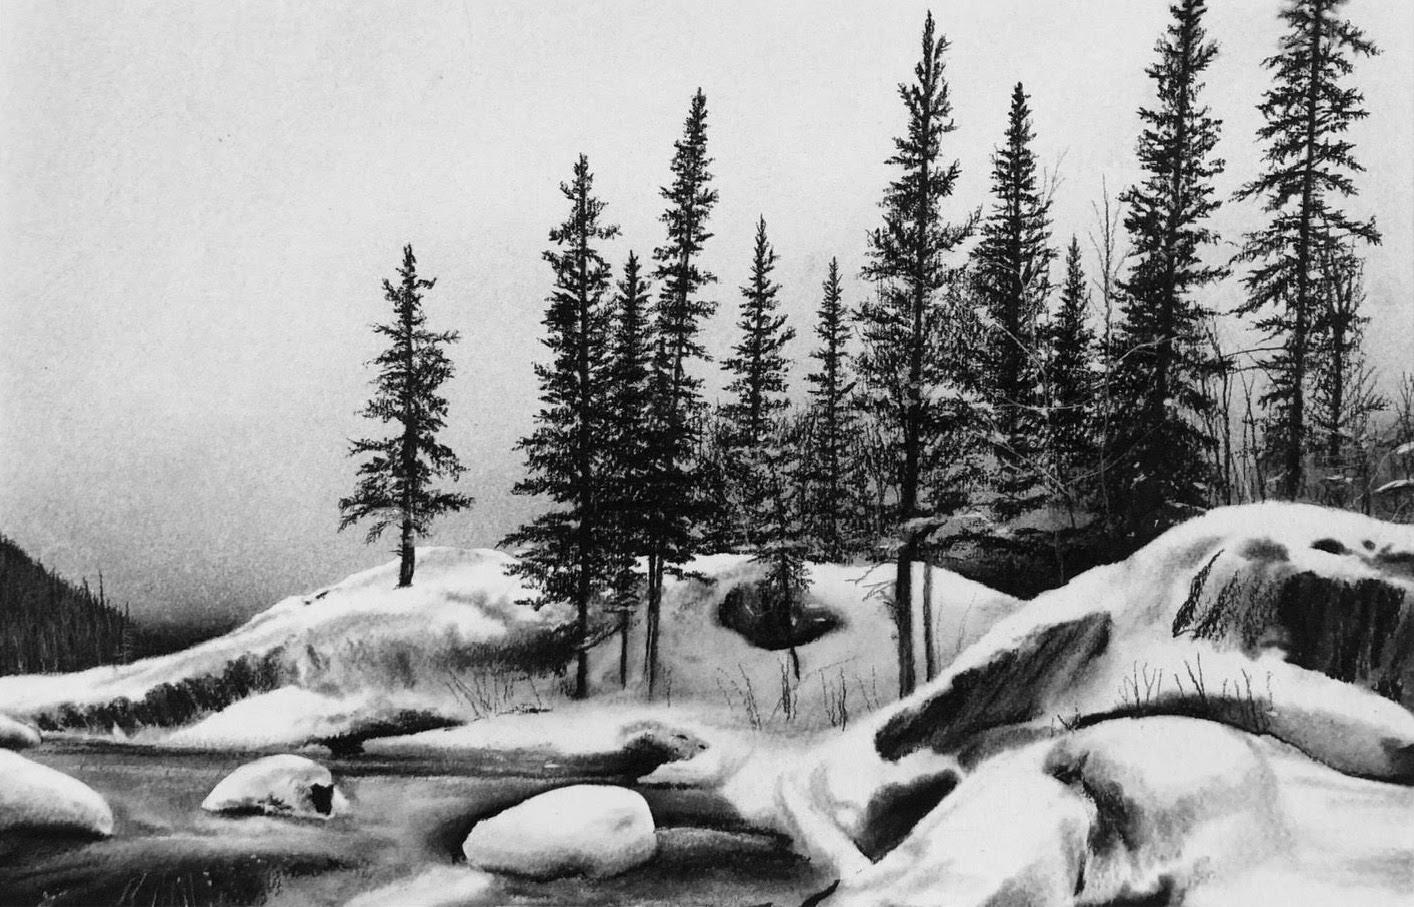 Katherine Curci Figurative Art - Winter Scene in Yoho, black and white charcoal drawing of trees and snow